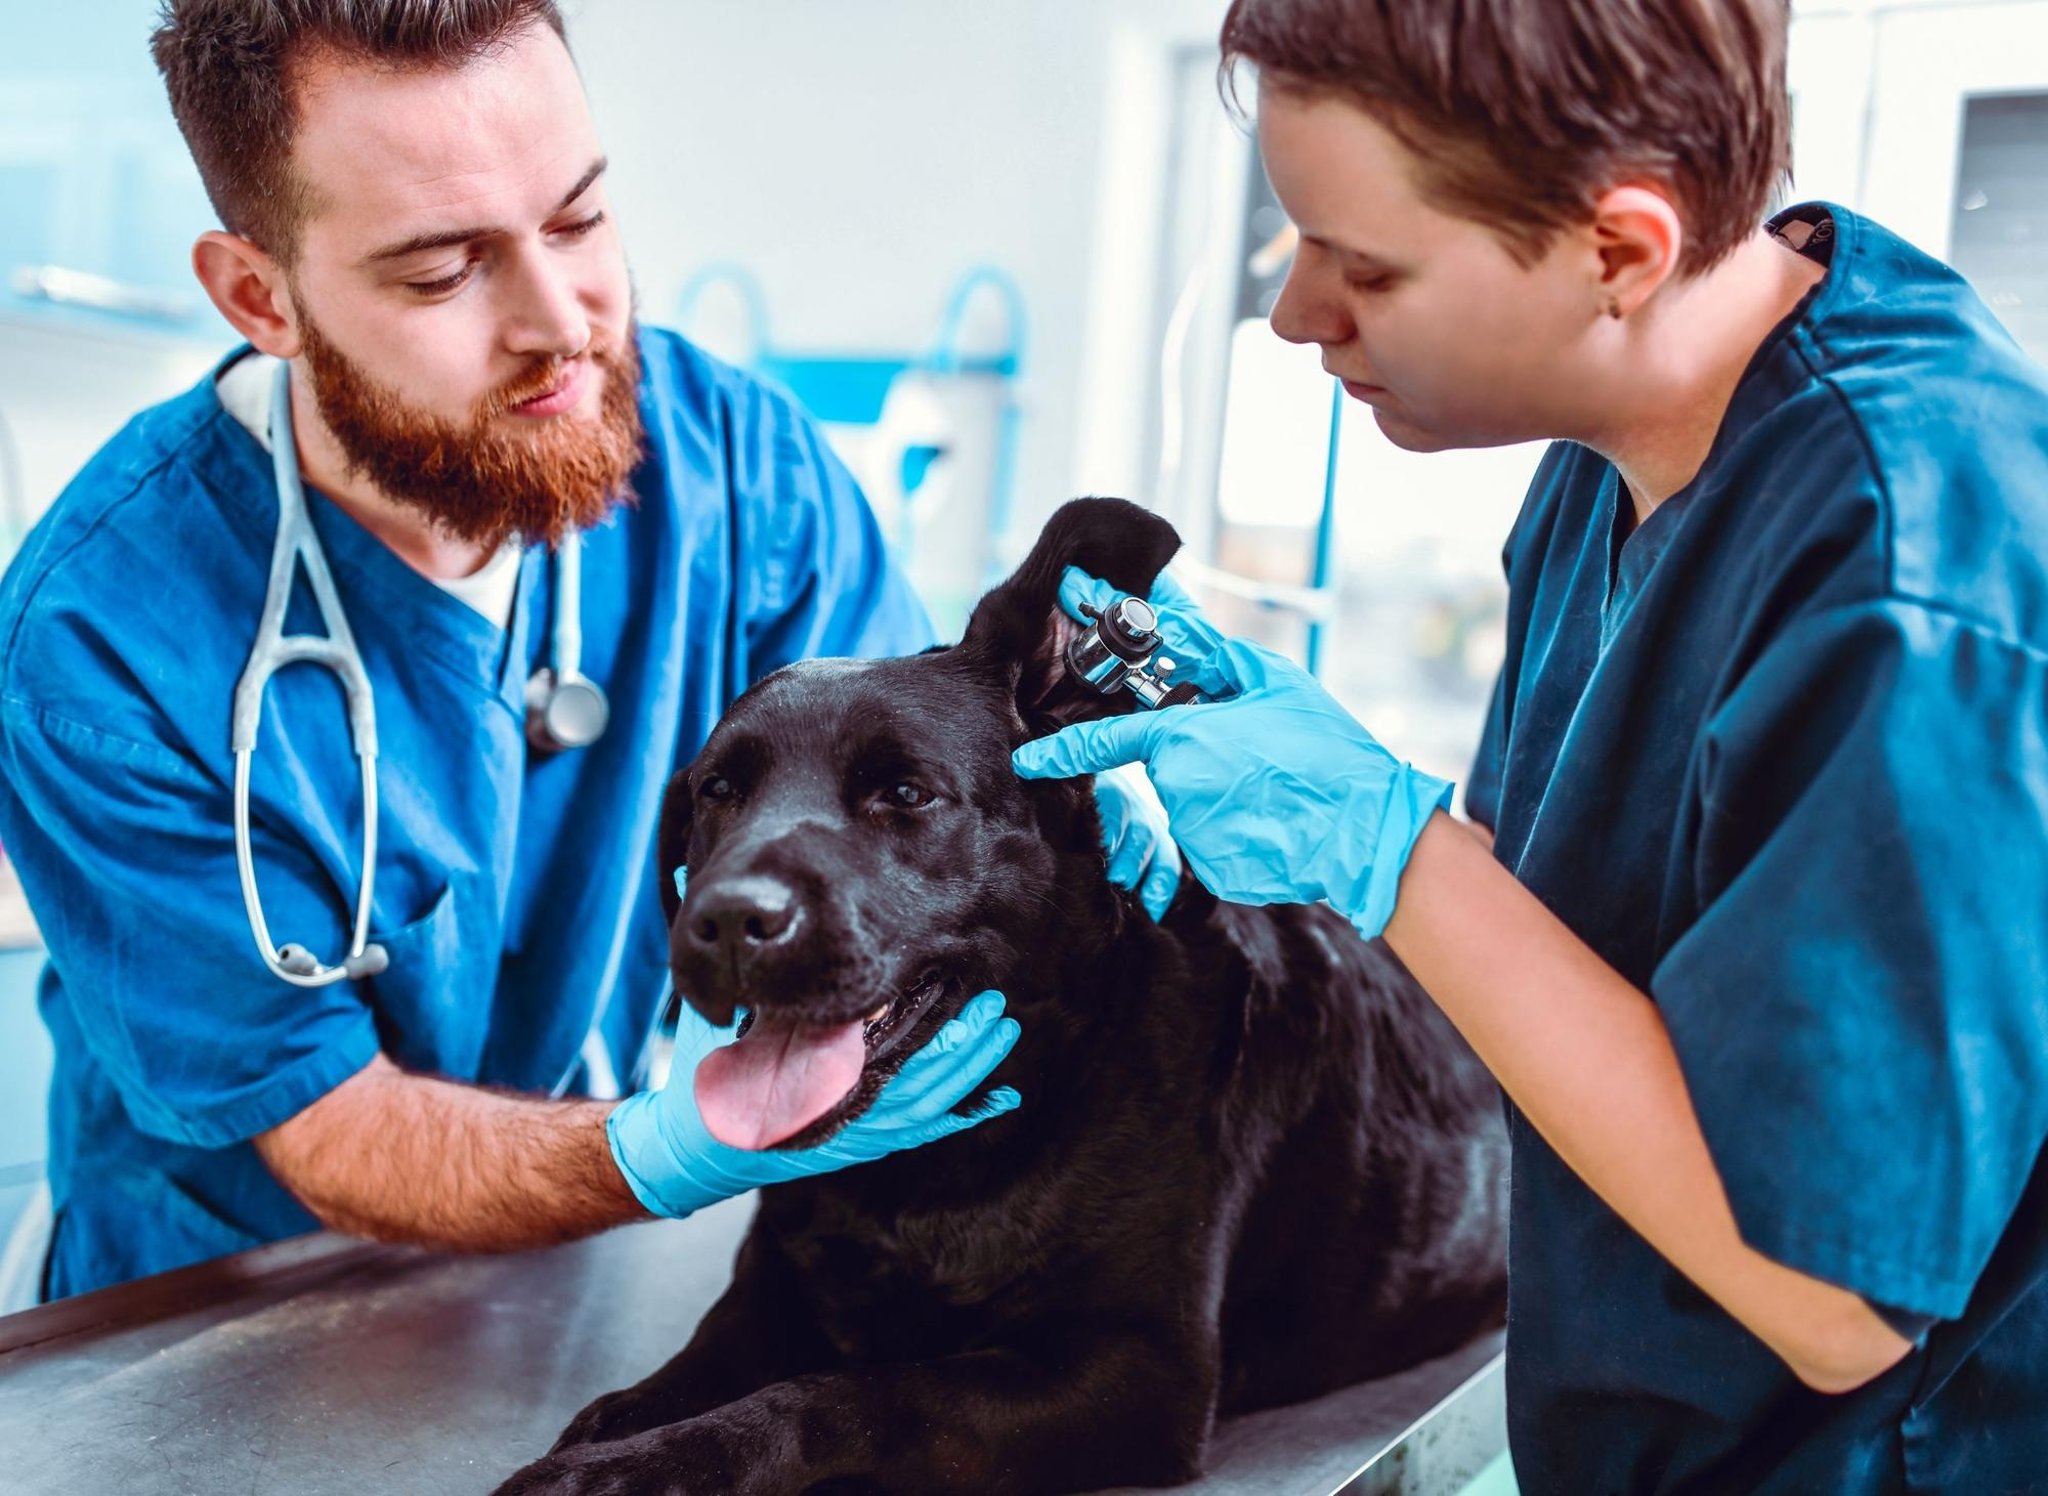 These are the 10 breeds of sickly pet dog most likely to need regular expensive vet visits